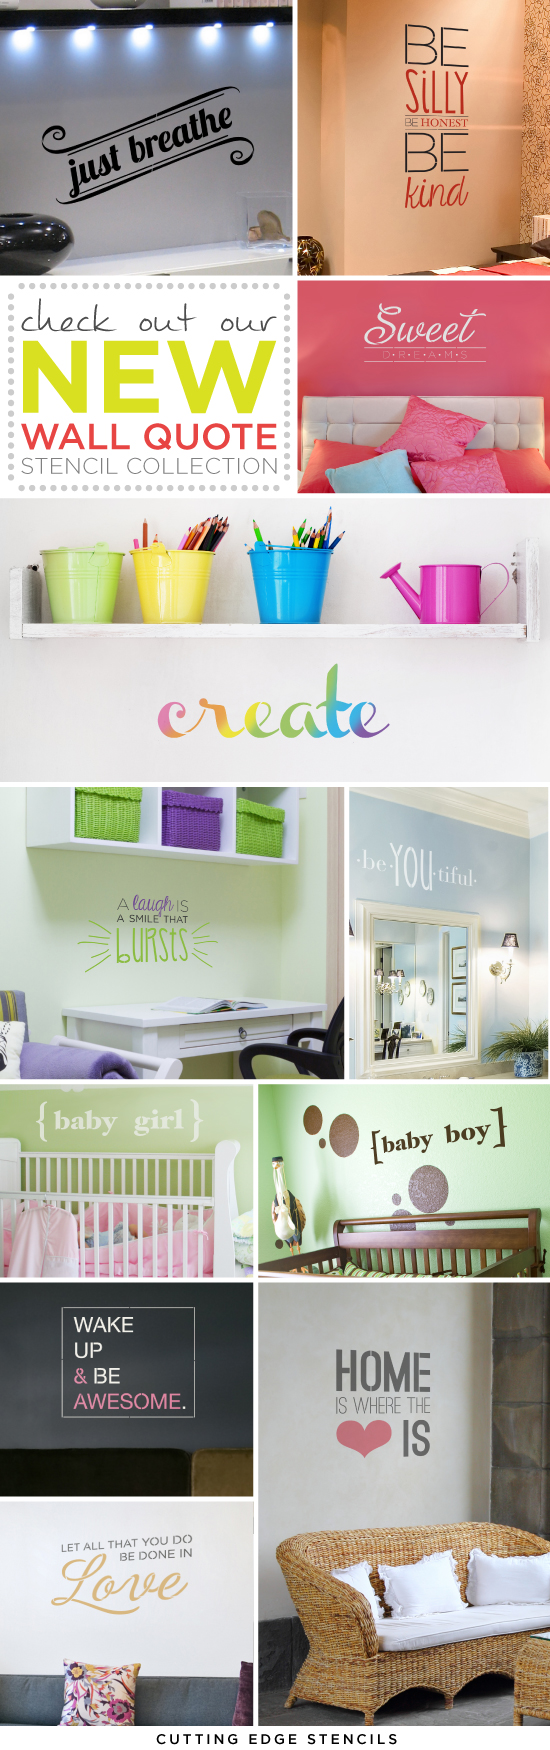 Stencil with a Wall Quote from Cutting Edge Stencils to personalize your space and make a statement! http://www.cuttingedgestencils.com/wall-quotes-stencils-quotes-for-walls.html